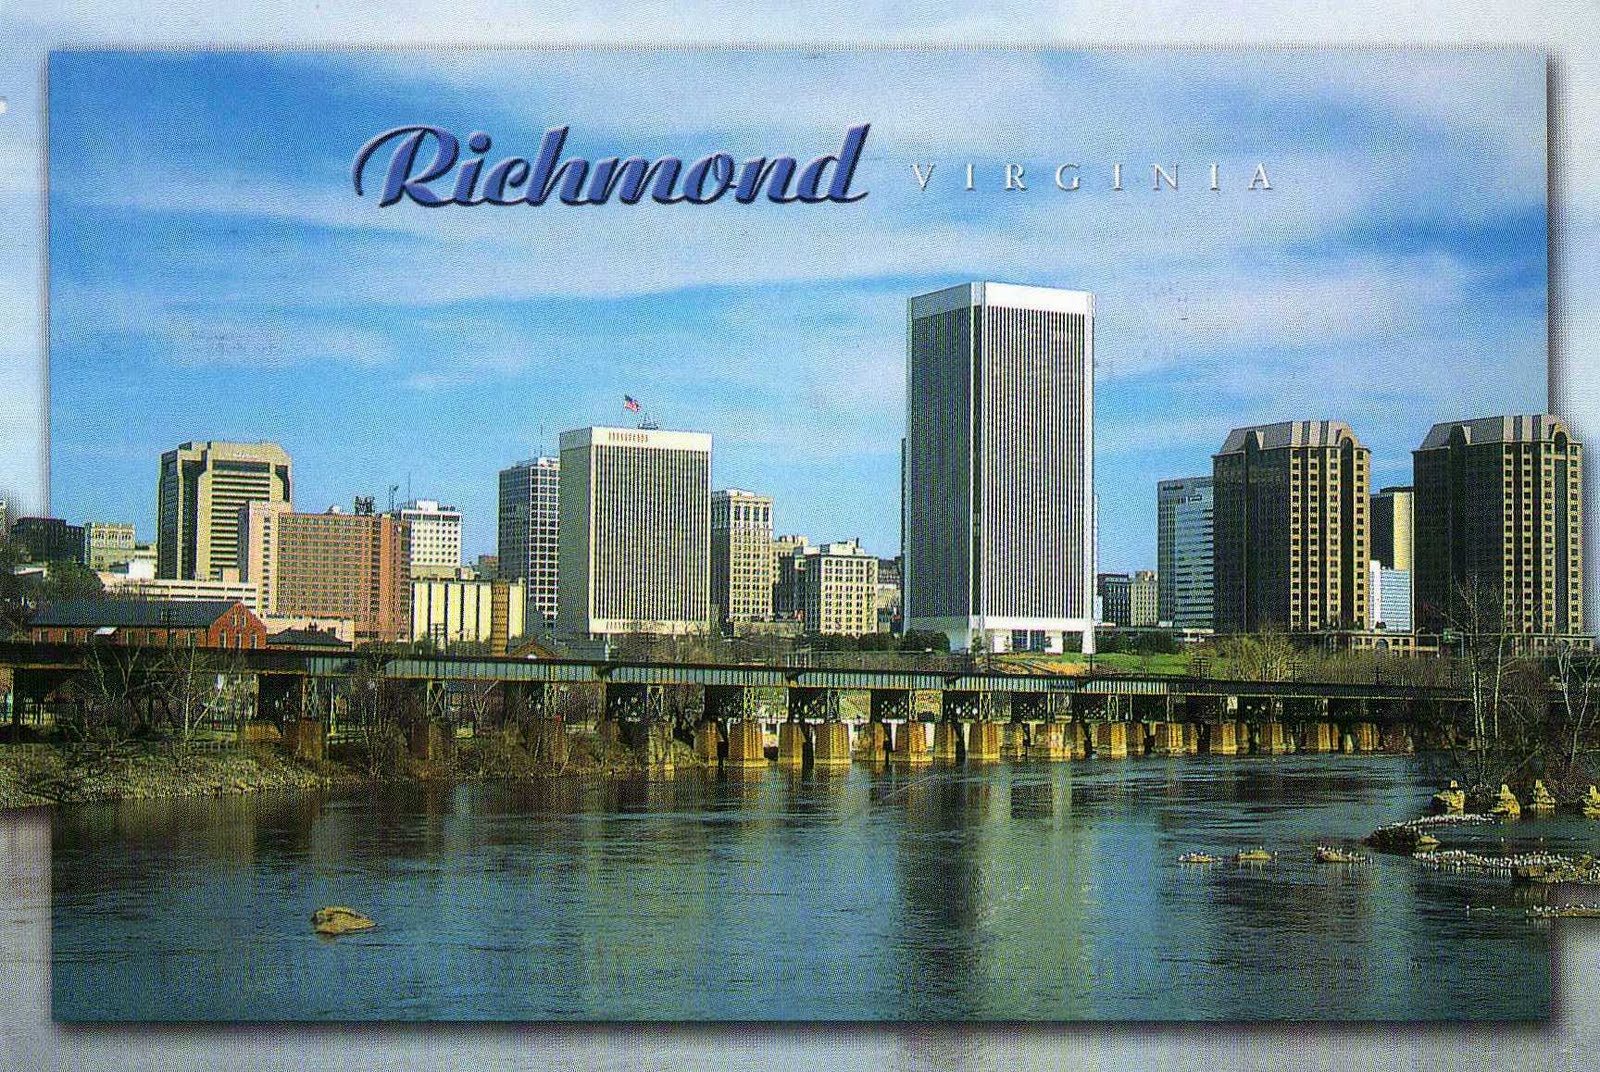 Founded in 1607 and indentified as the state capitol in 1780, Richmond... 